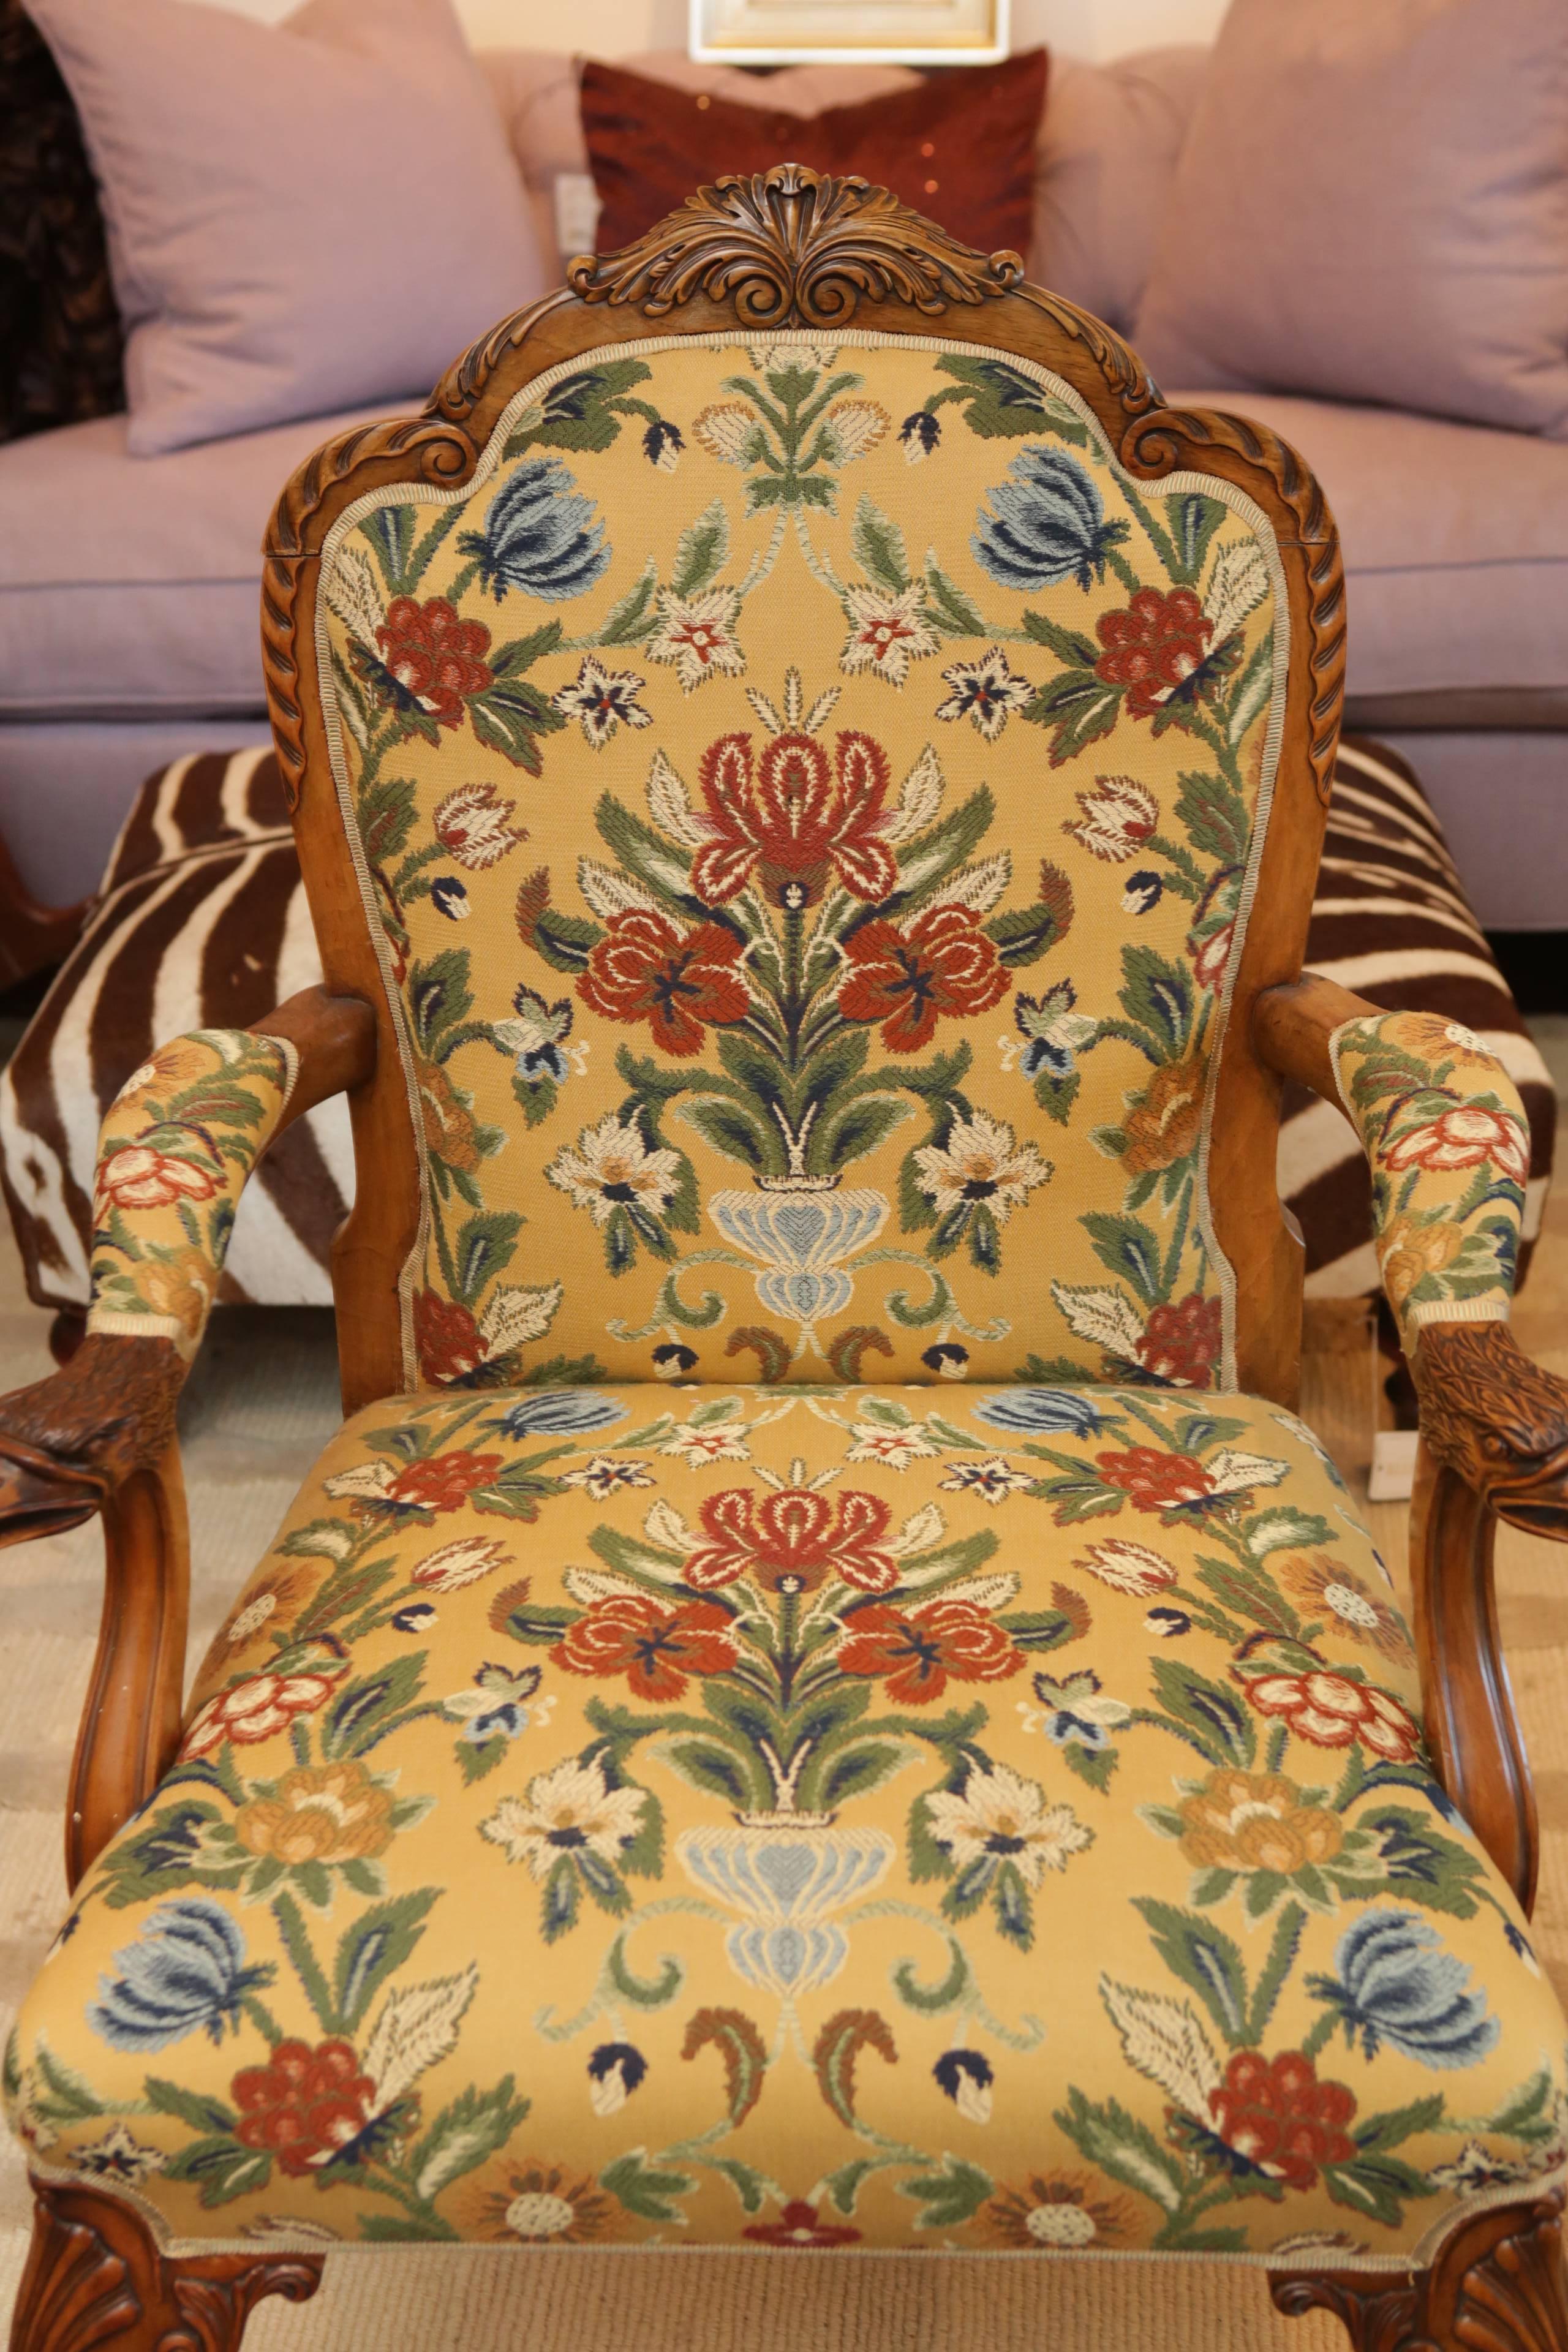 Carved Eagle Armchair with Floral Upholstery 1